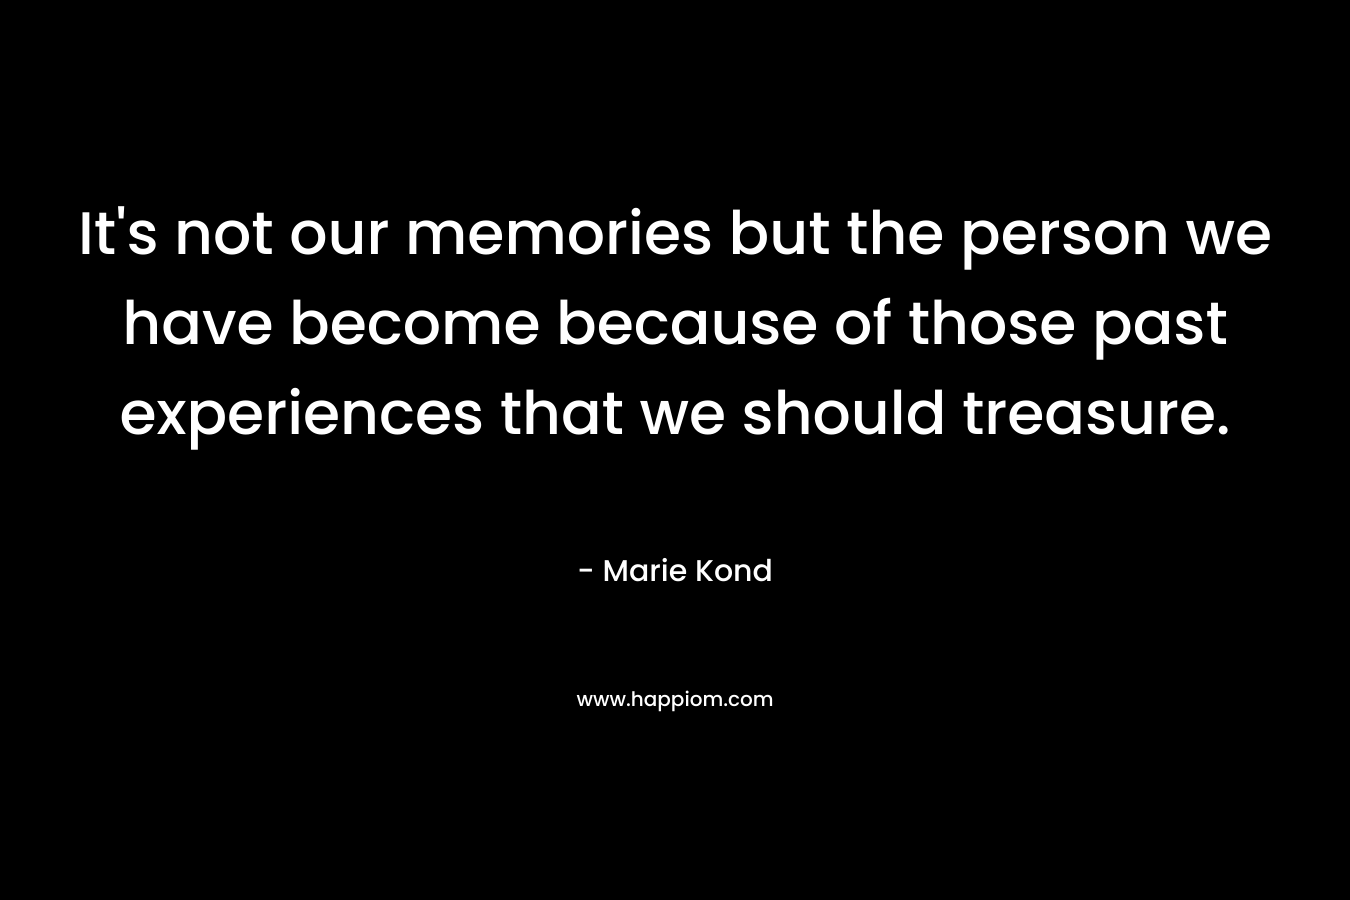 It’s not our memories but the person we have become because of those past experiences that we should treasure. – Marie Kond